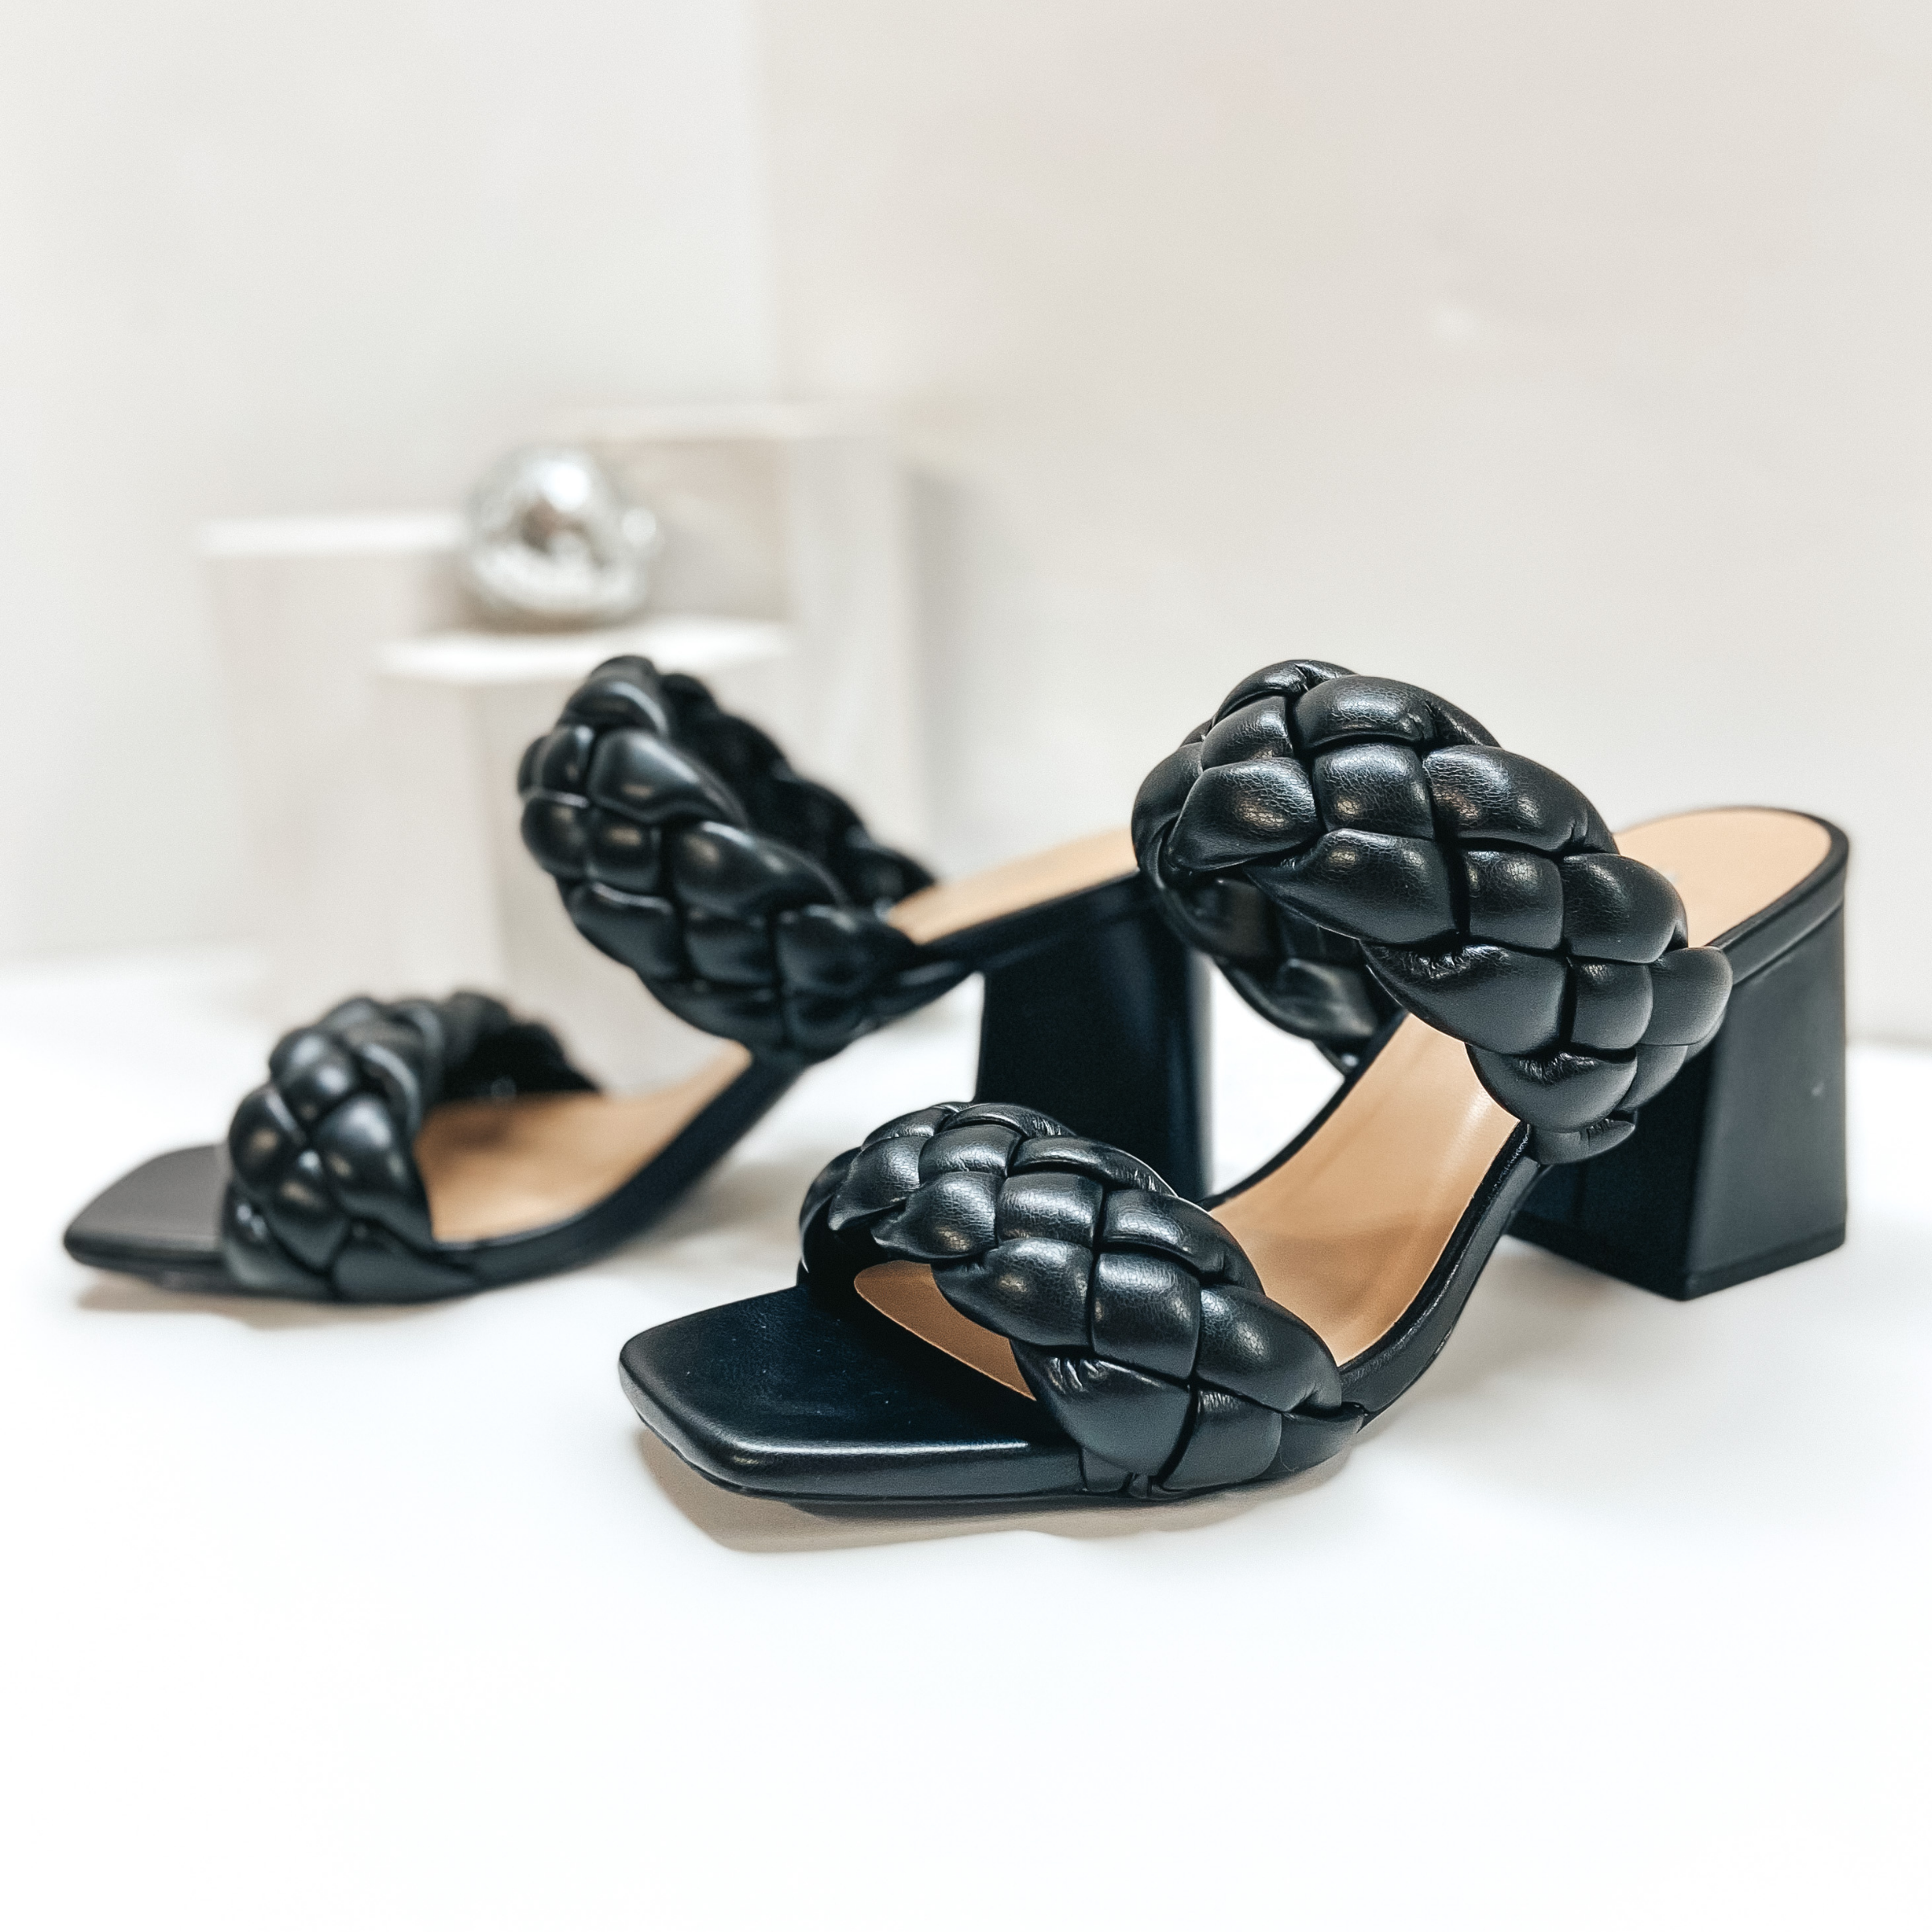 Black braided block heels with two staps. Pictured against a white background.